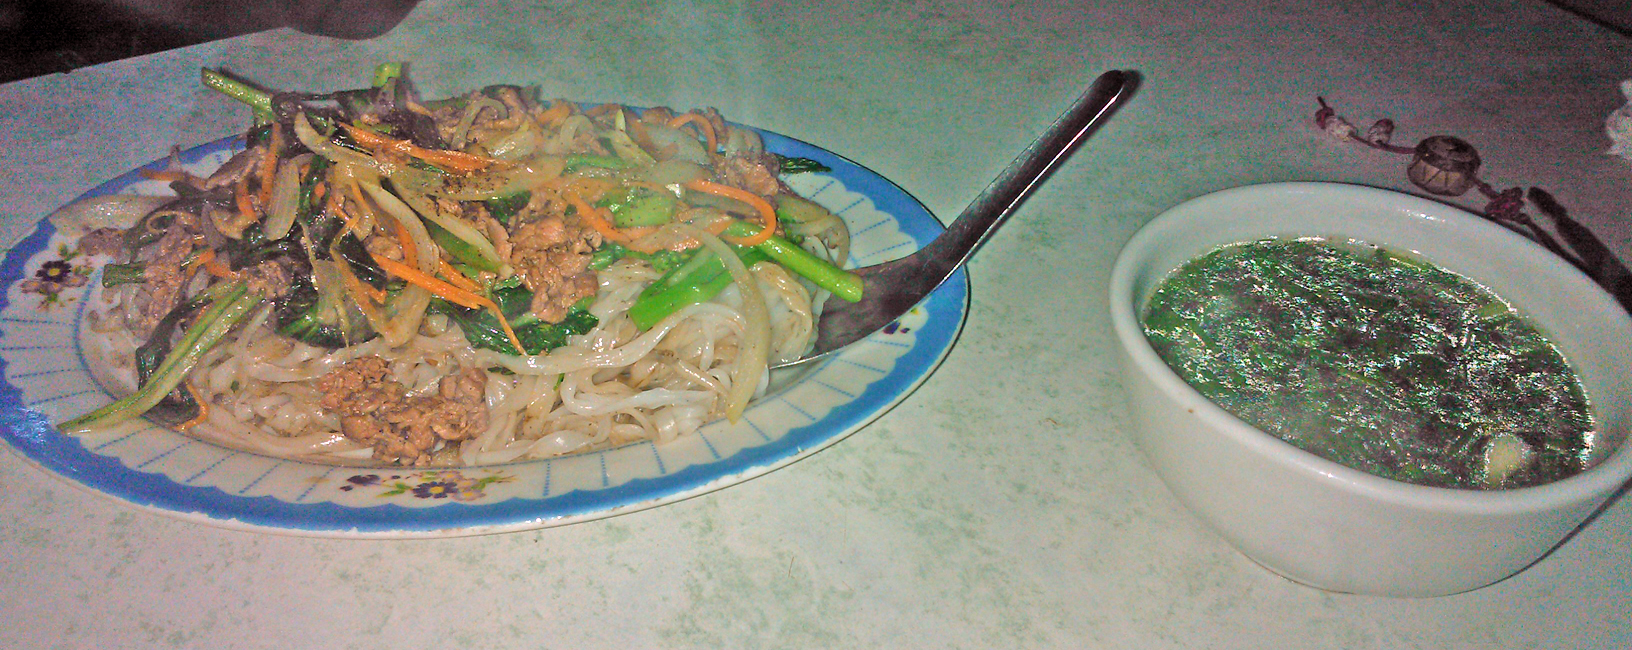 Ha Noi - Noodles with beef and vegetables, also very delicious.